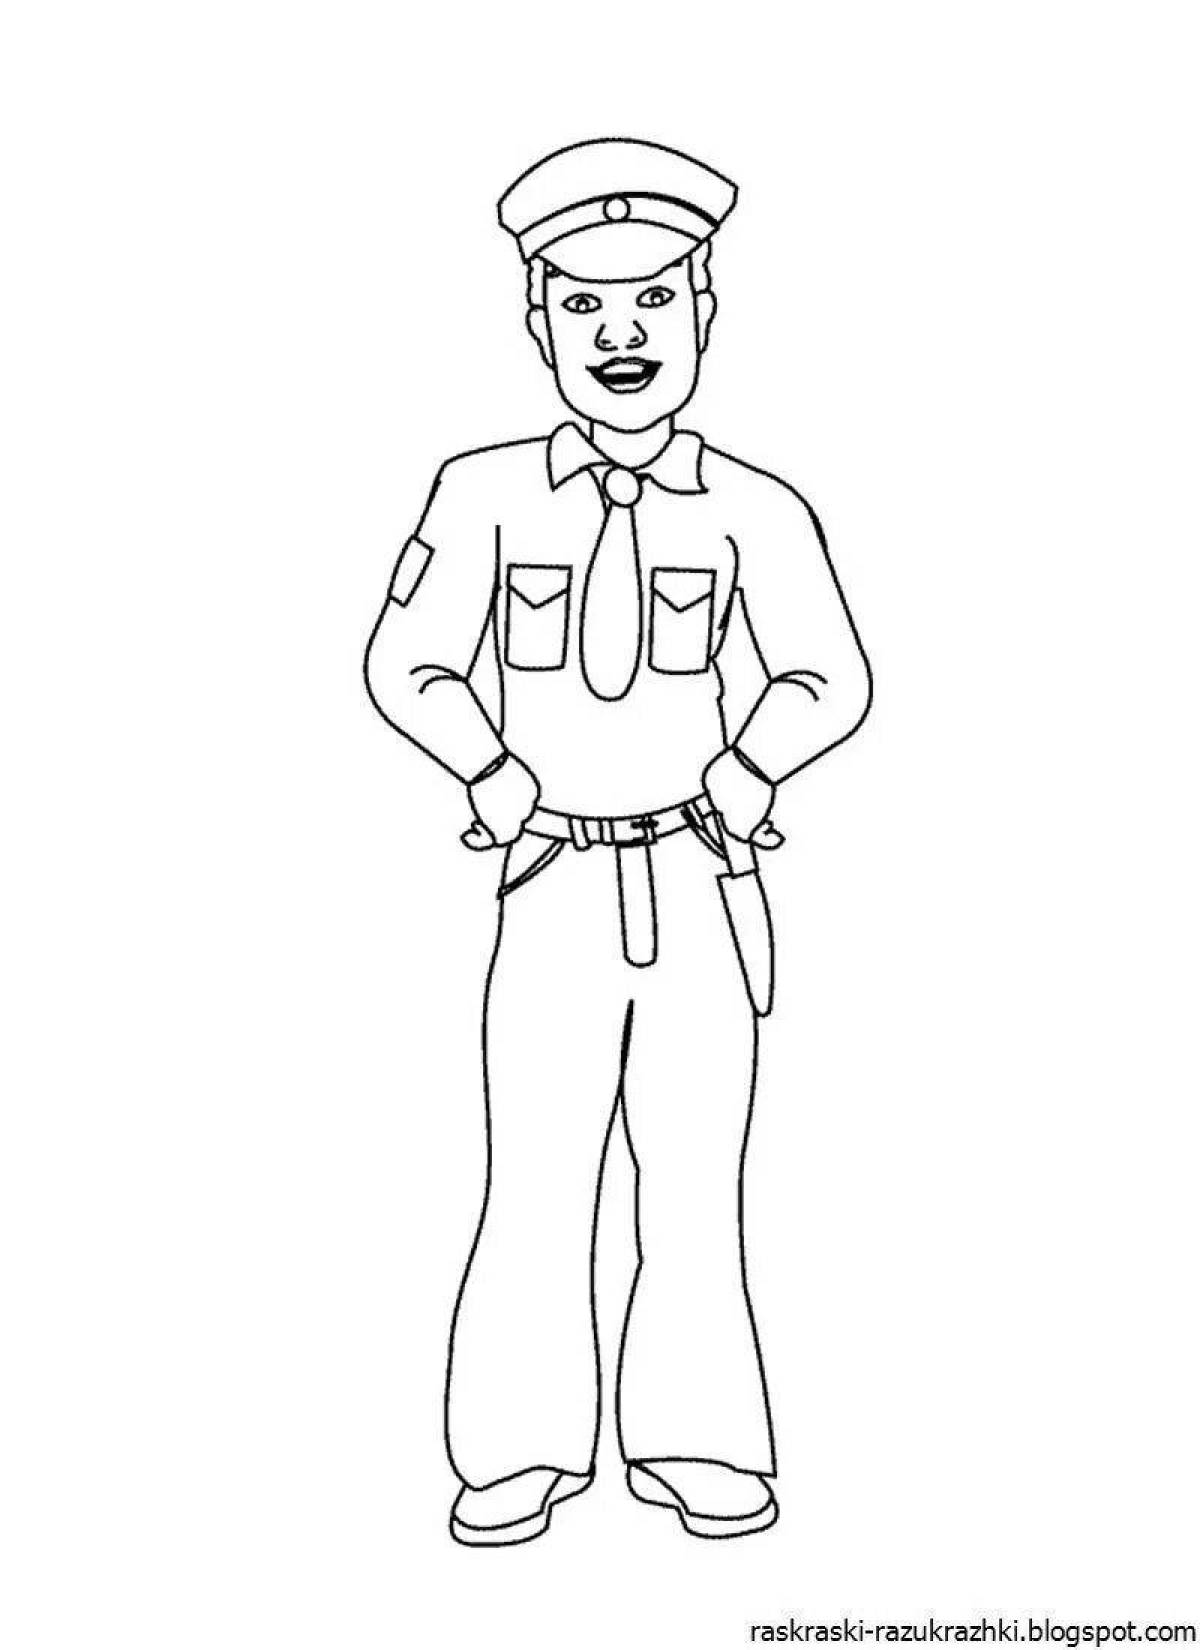 Coloring page joyful police profession